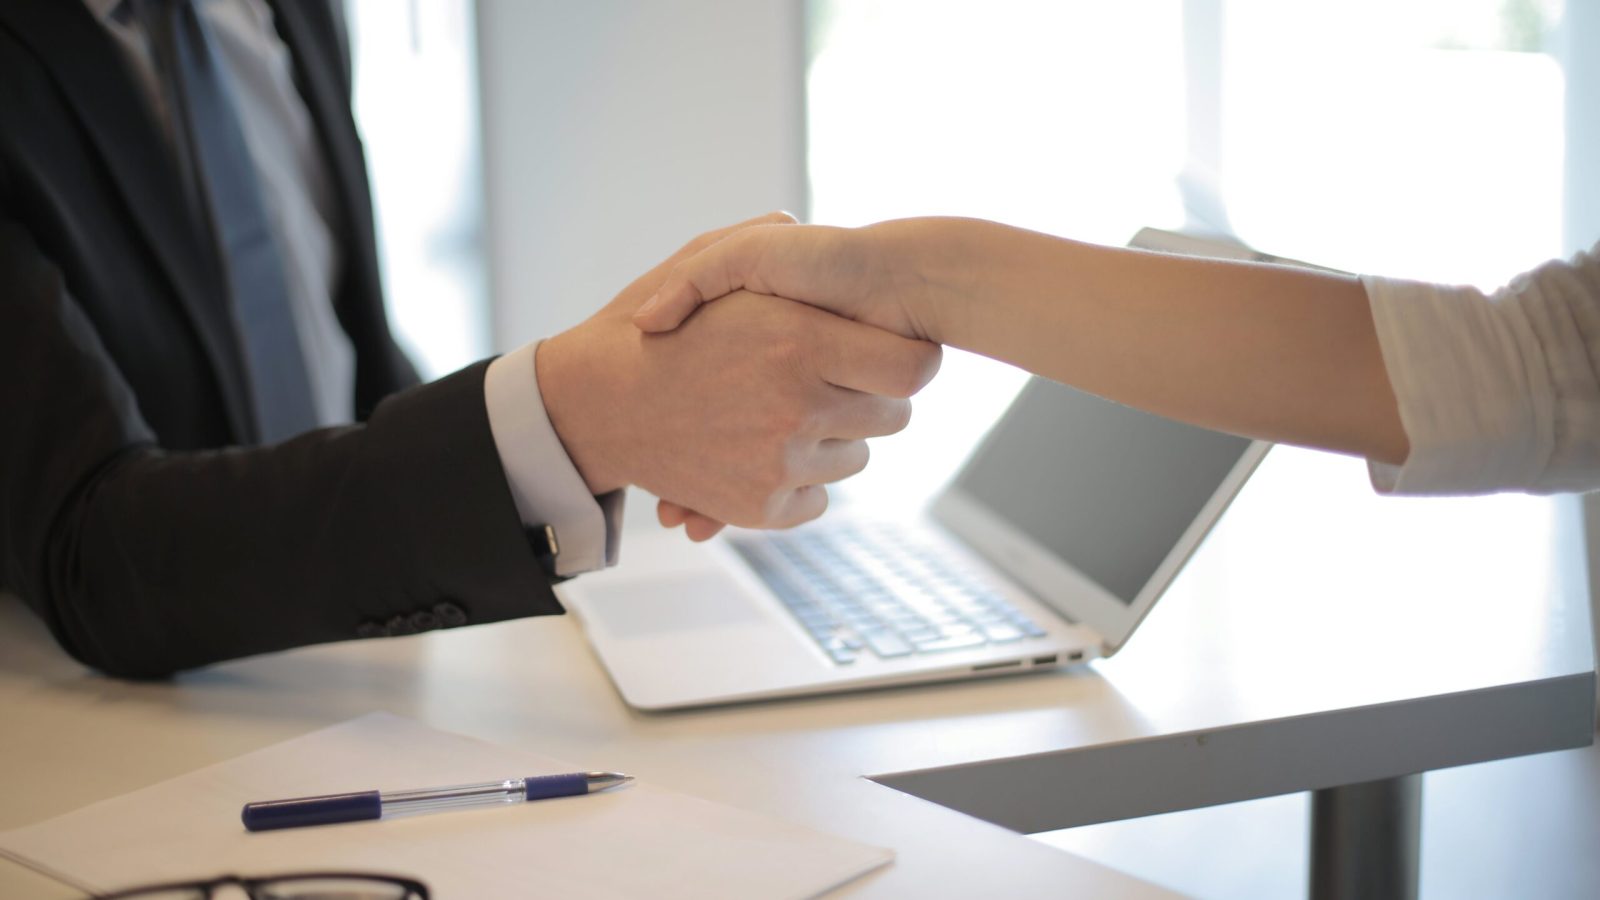 Explore business partnerships and professional connections with a handshake in Des Moines, Ankeny, and throughout Iowa.